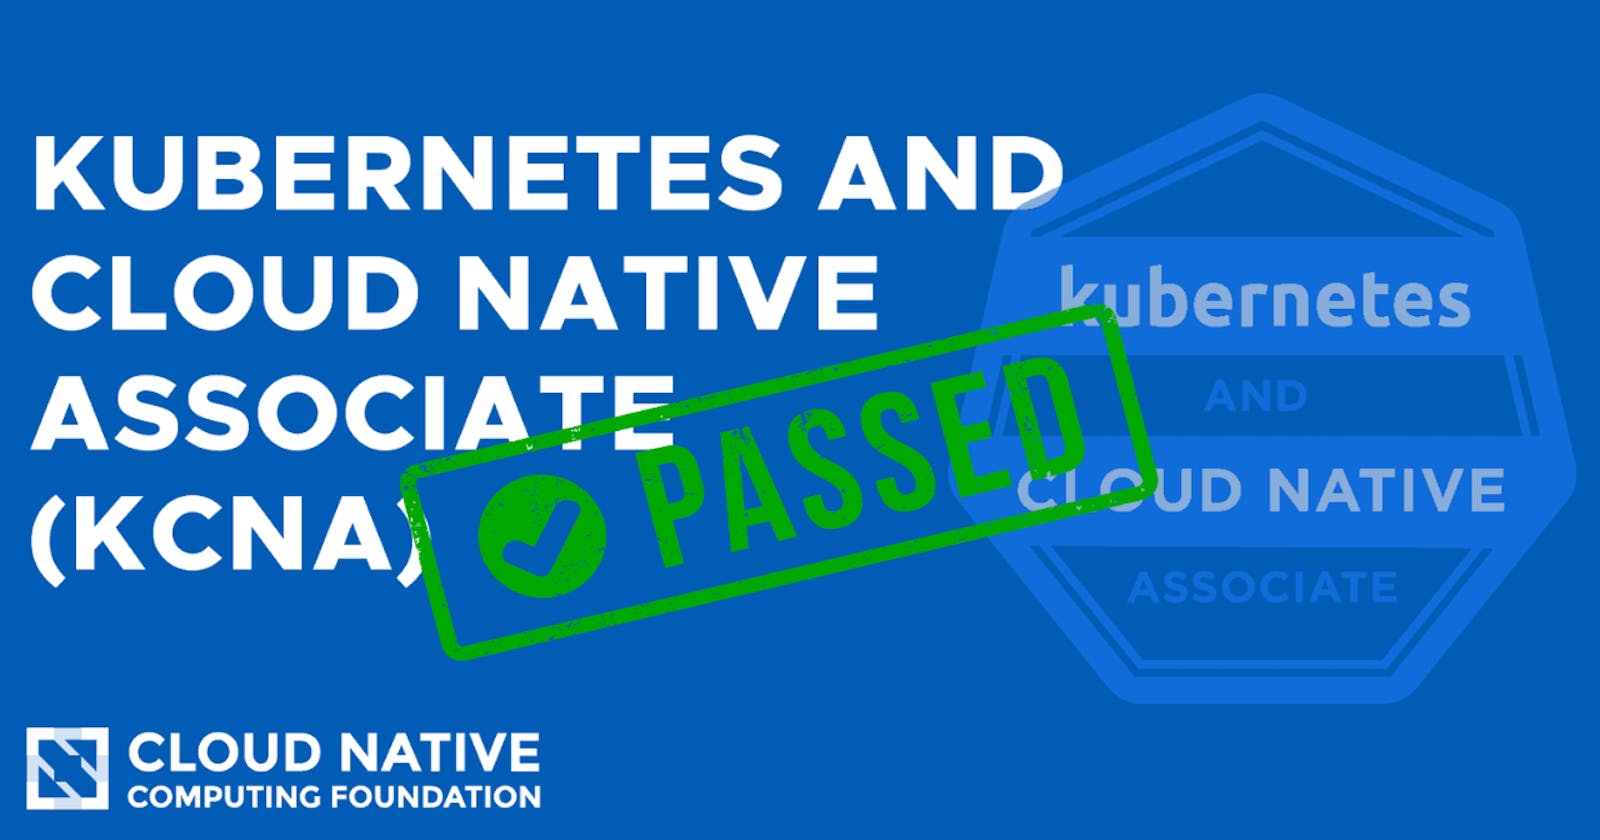 How to Pass the KCNA - Kubernetes And Cloud Native Associate